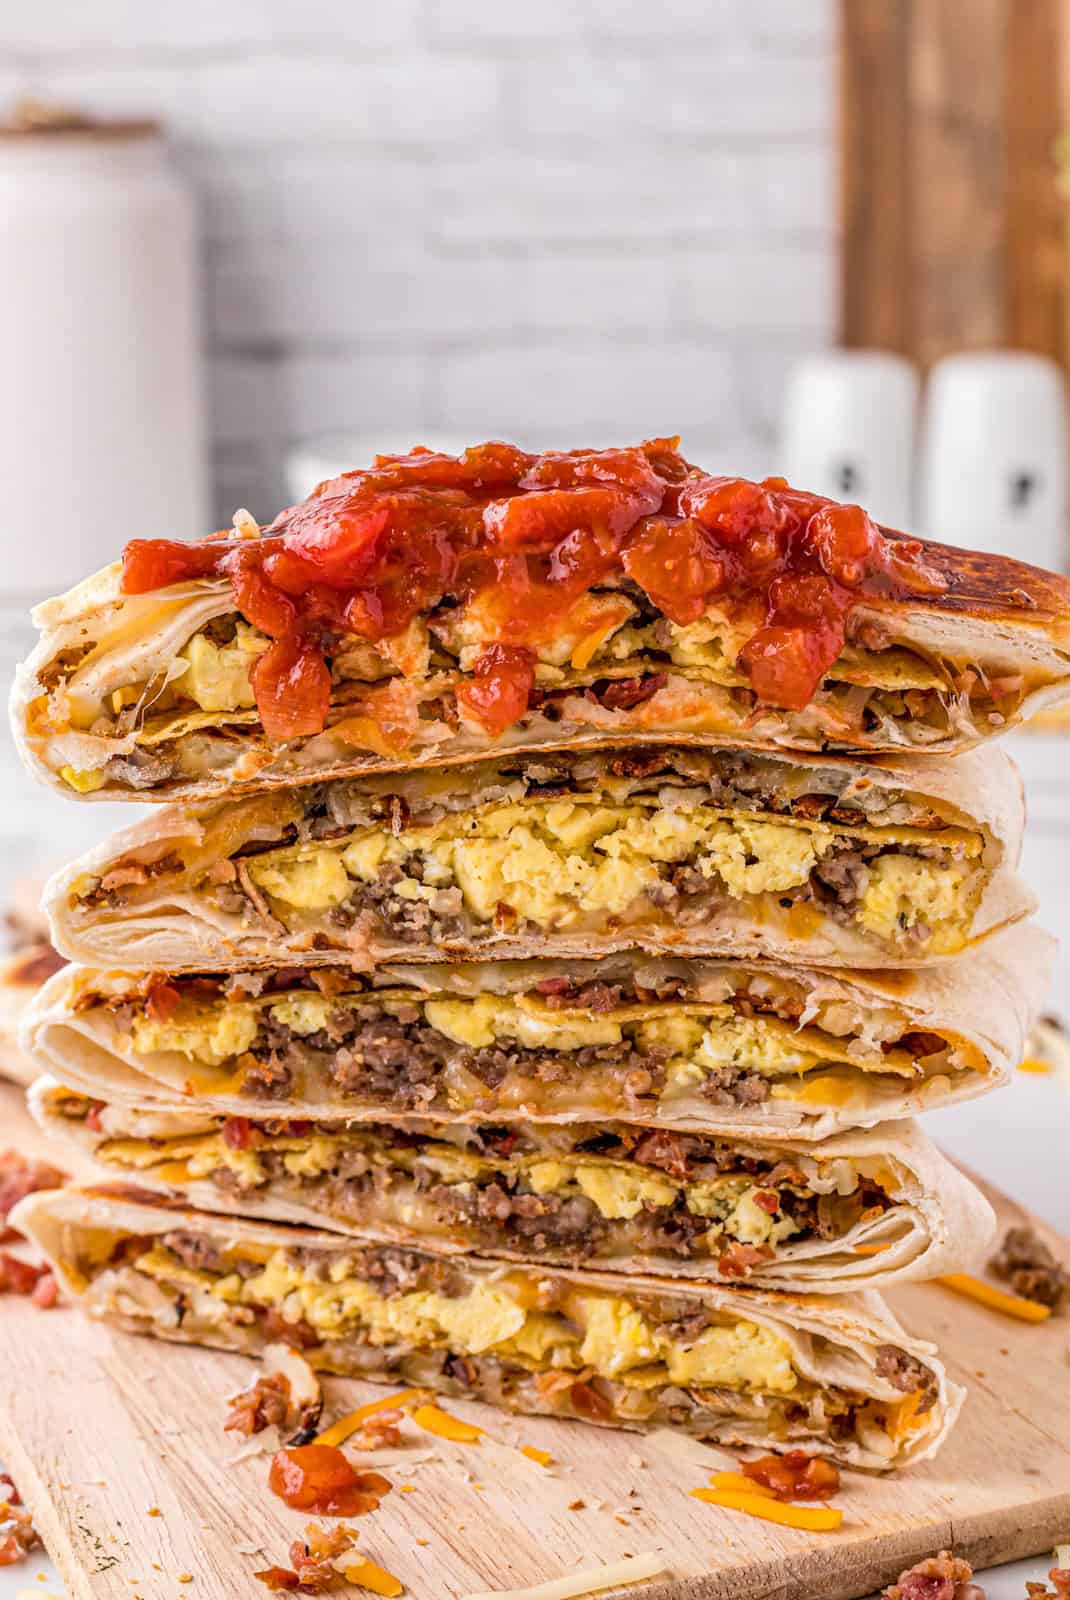 Breakfast Crunchwrap cut in half and stacked topped with salsa.